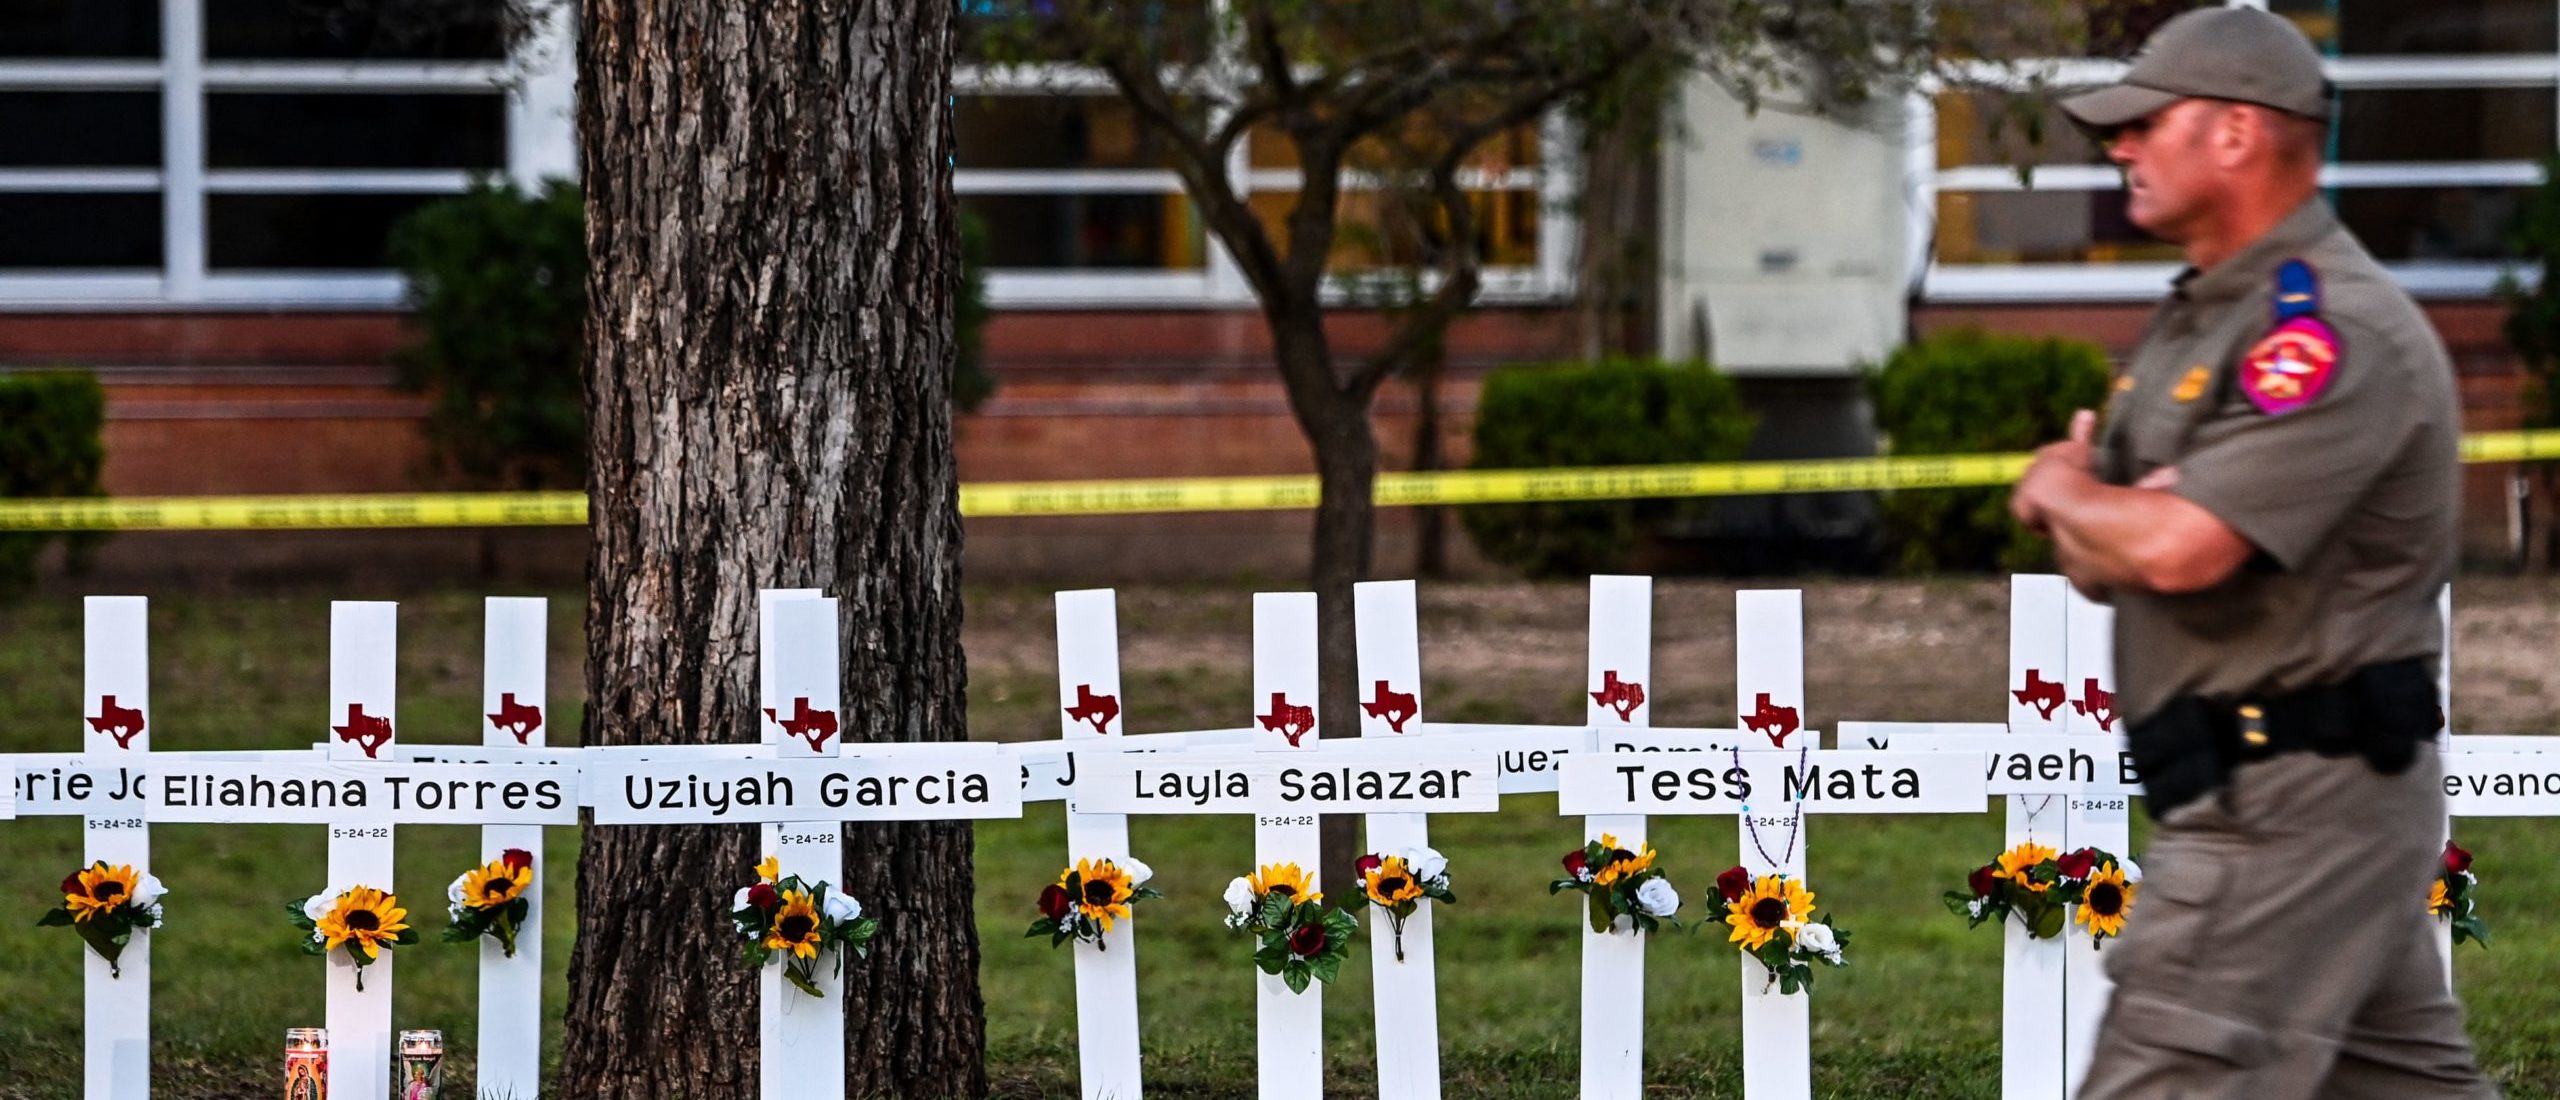 TOPSHOT - Police officers walk past a makeshift memorial for the shooting victims at Robb Elementary School in Uvalde, Texas, on May 26, 2022. - Grief at the massacre of 19 children at the elementary school in Texas spilled into confrontation on May 25, as angry questions mounted over gun control -- and whether this latest tragedy could have been prevented. The tight-knit Latino community of Uvalde on May 24 became the site of the worst school shooting in a decade, committed by a disturbed 18-year-old armed with a legally bought assault rifle. (Photo by CHANDAN KHANNA / AFP) (Photo by CHANDAN KHANNA/AFP via Getty Images)